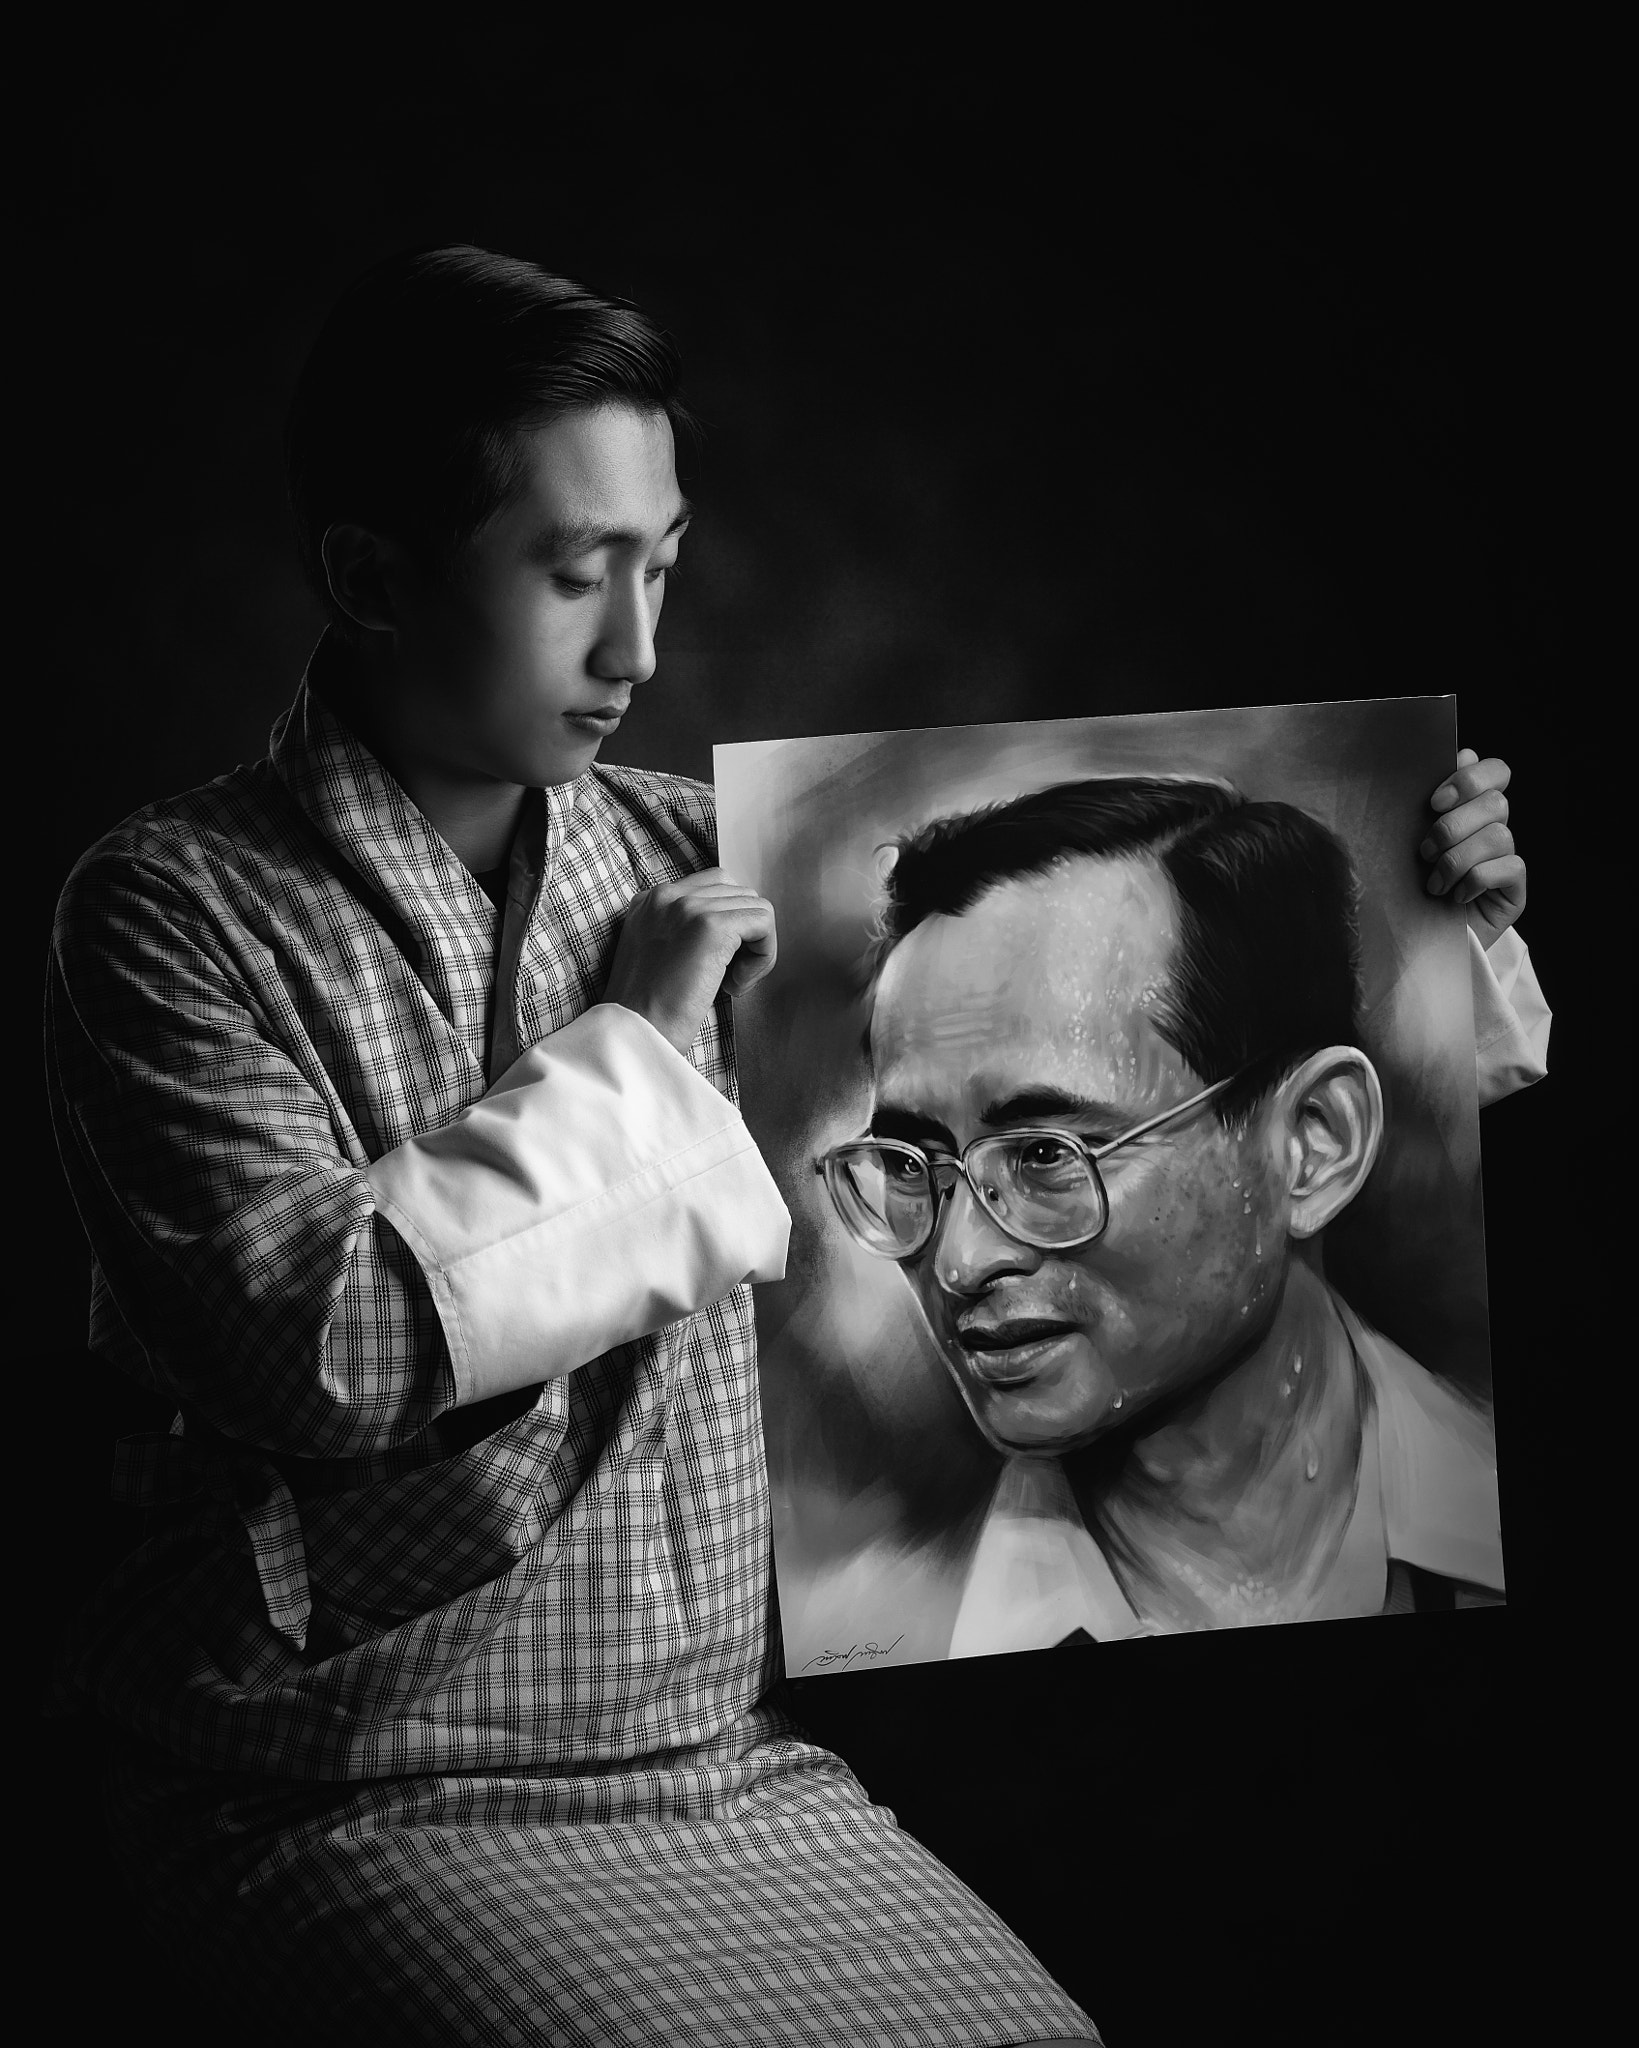 Sigma dp3 Quattro sample photo. Bhutanese with the painting of king bhumibol photography